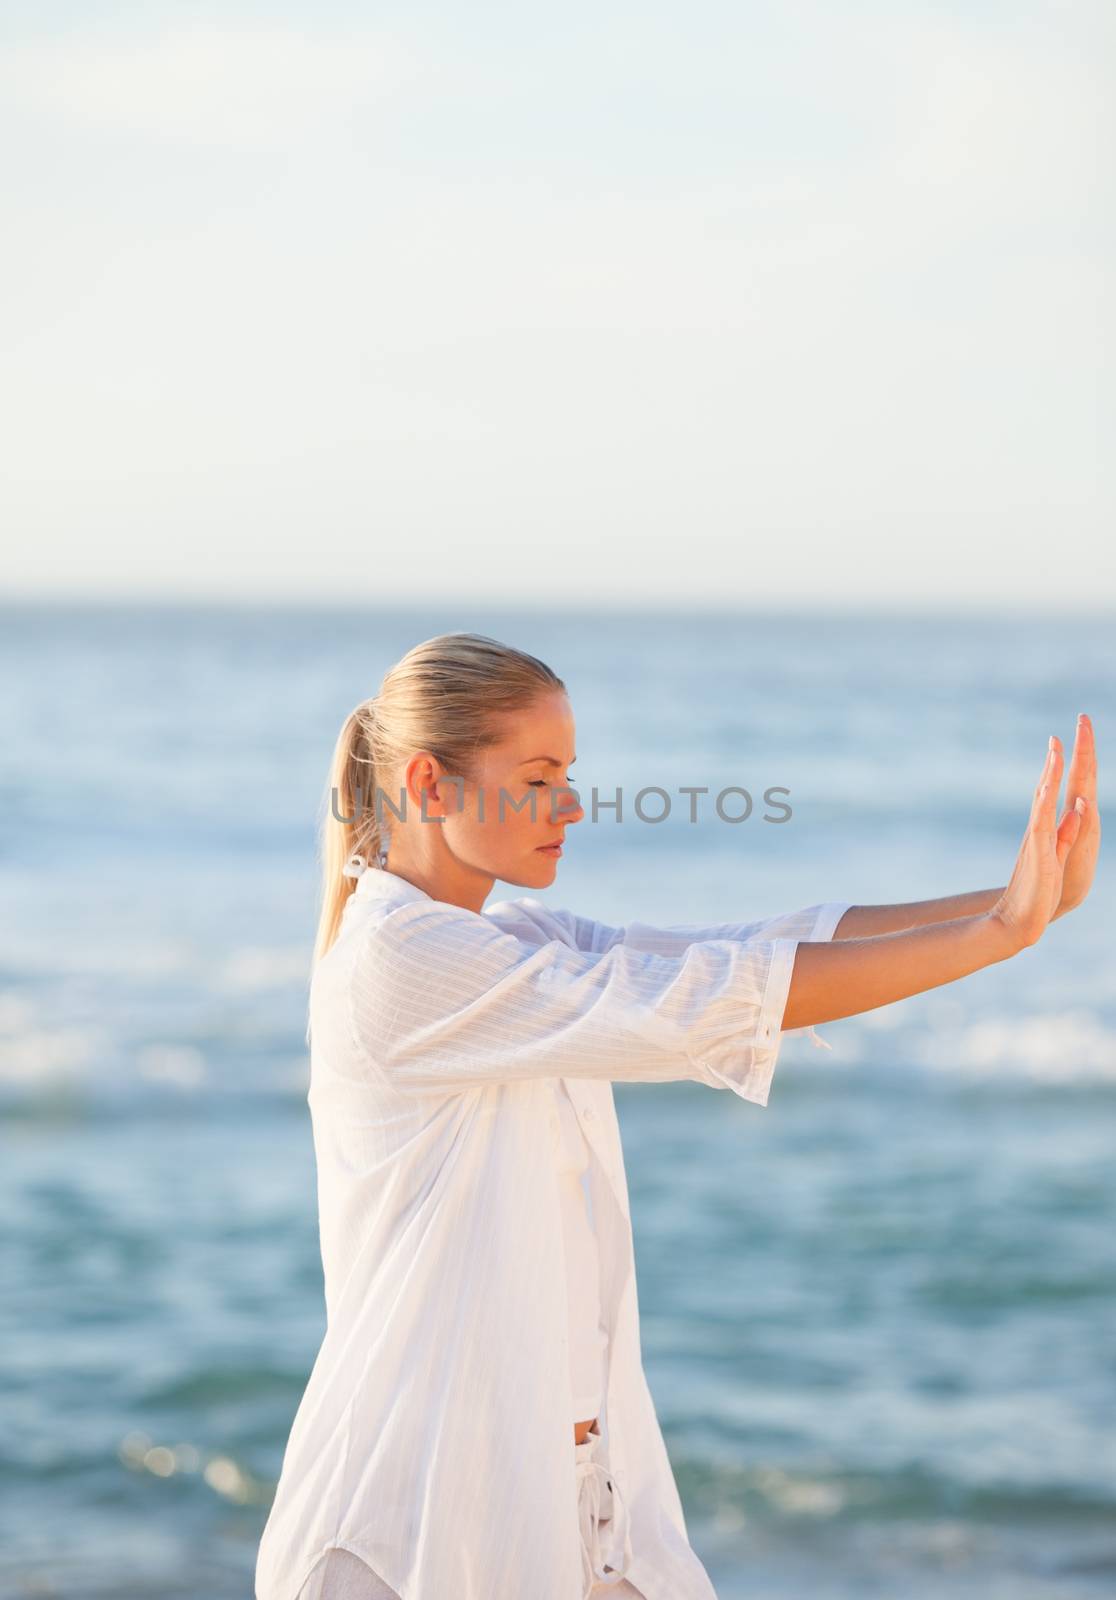 Woman practicing yoga against the sea